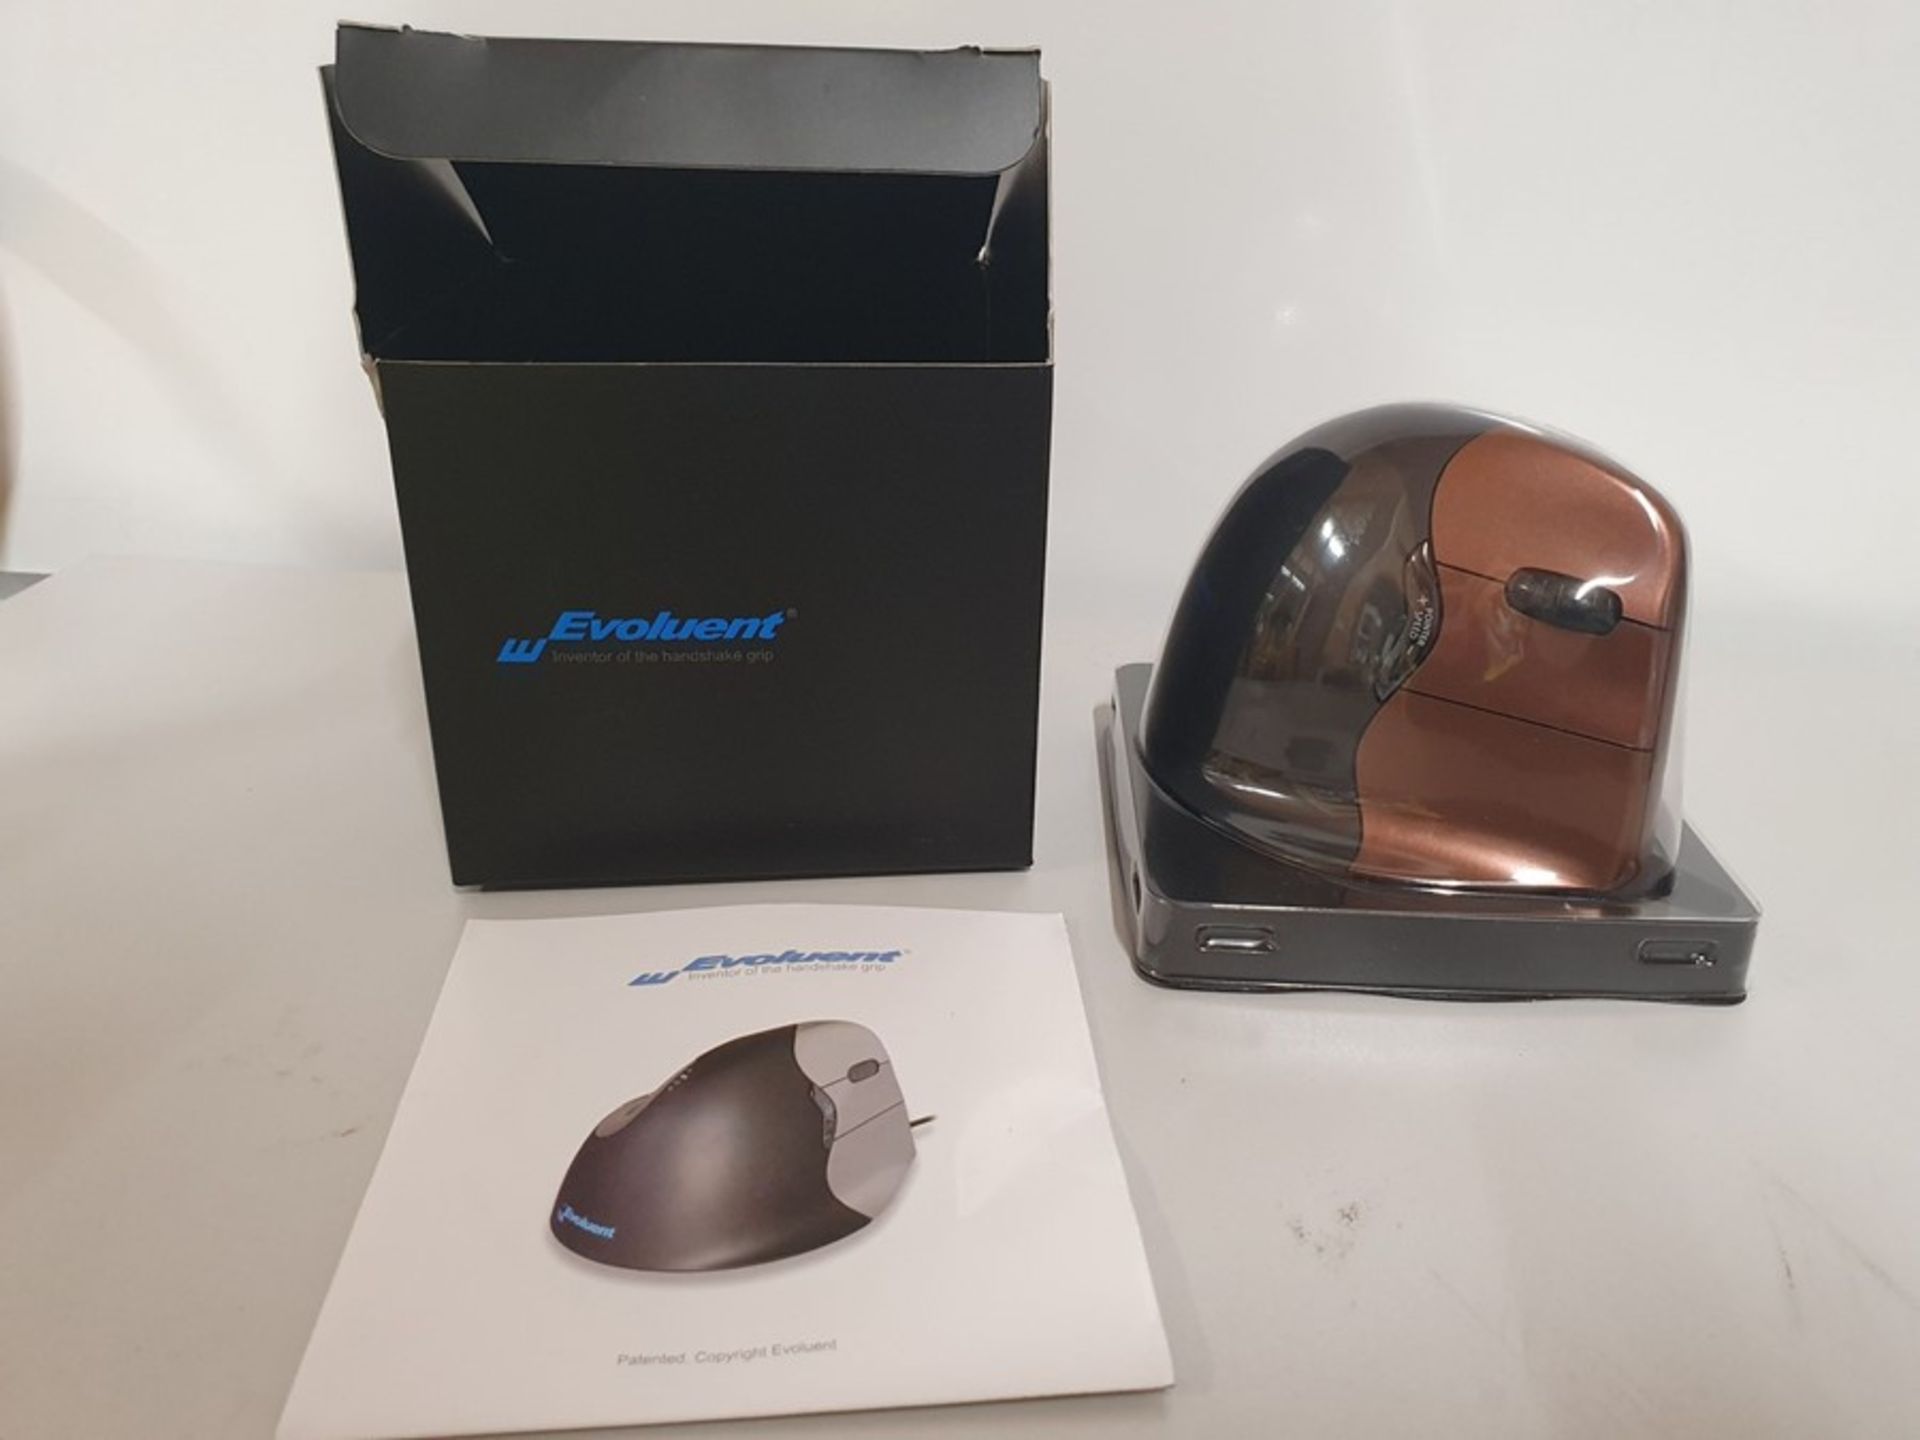 ONE LOT TO CONTAIN ONE EVOLUENT4 SMALL WIRELESS MOUSE - RIGHT HAND. CUSTOMER RETURN. UNTESTED.